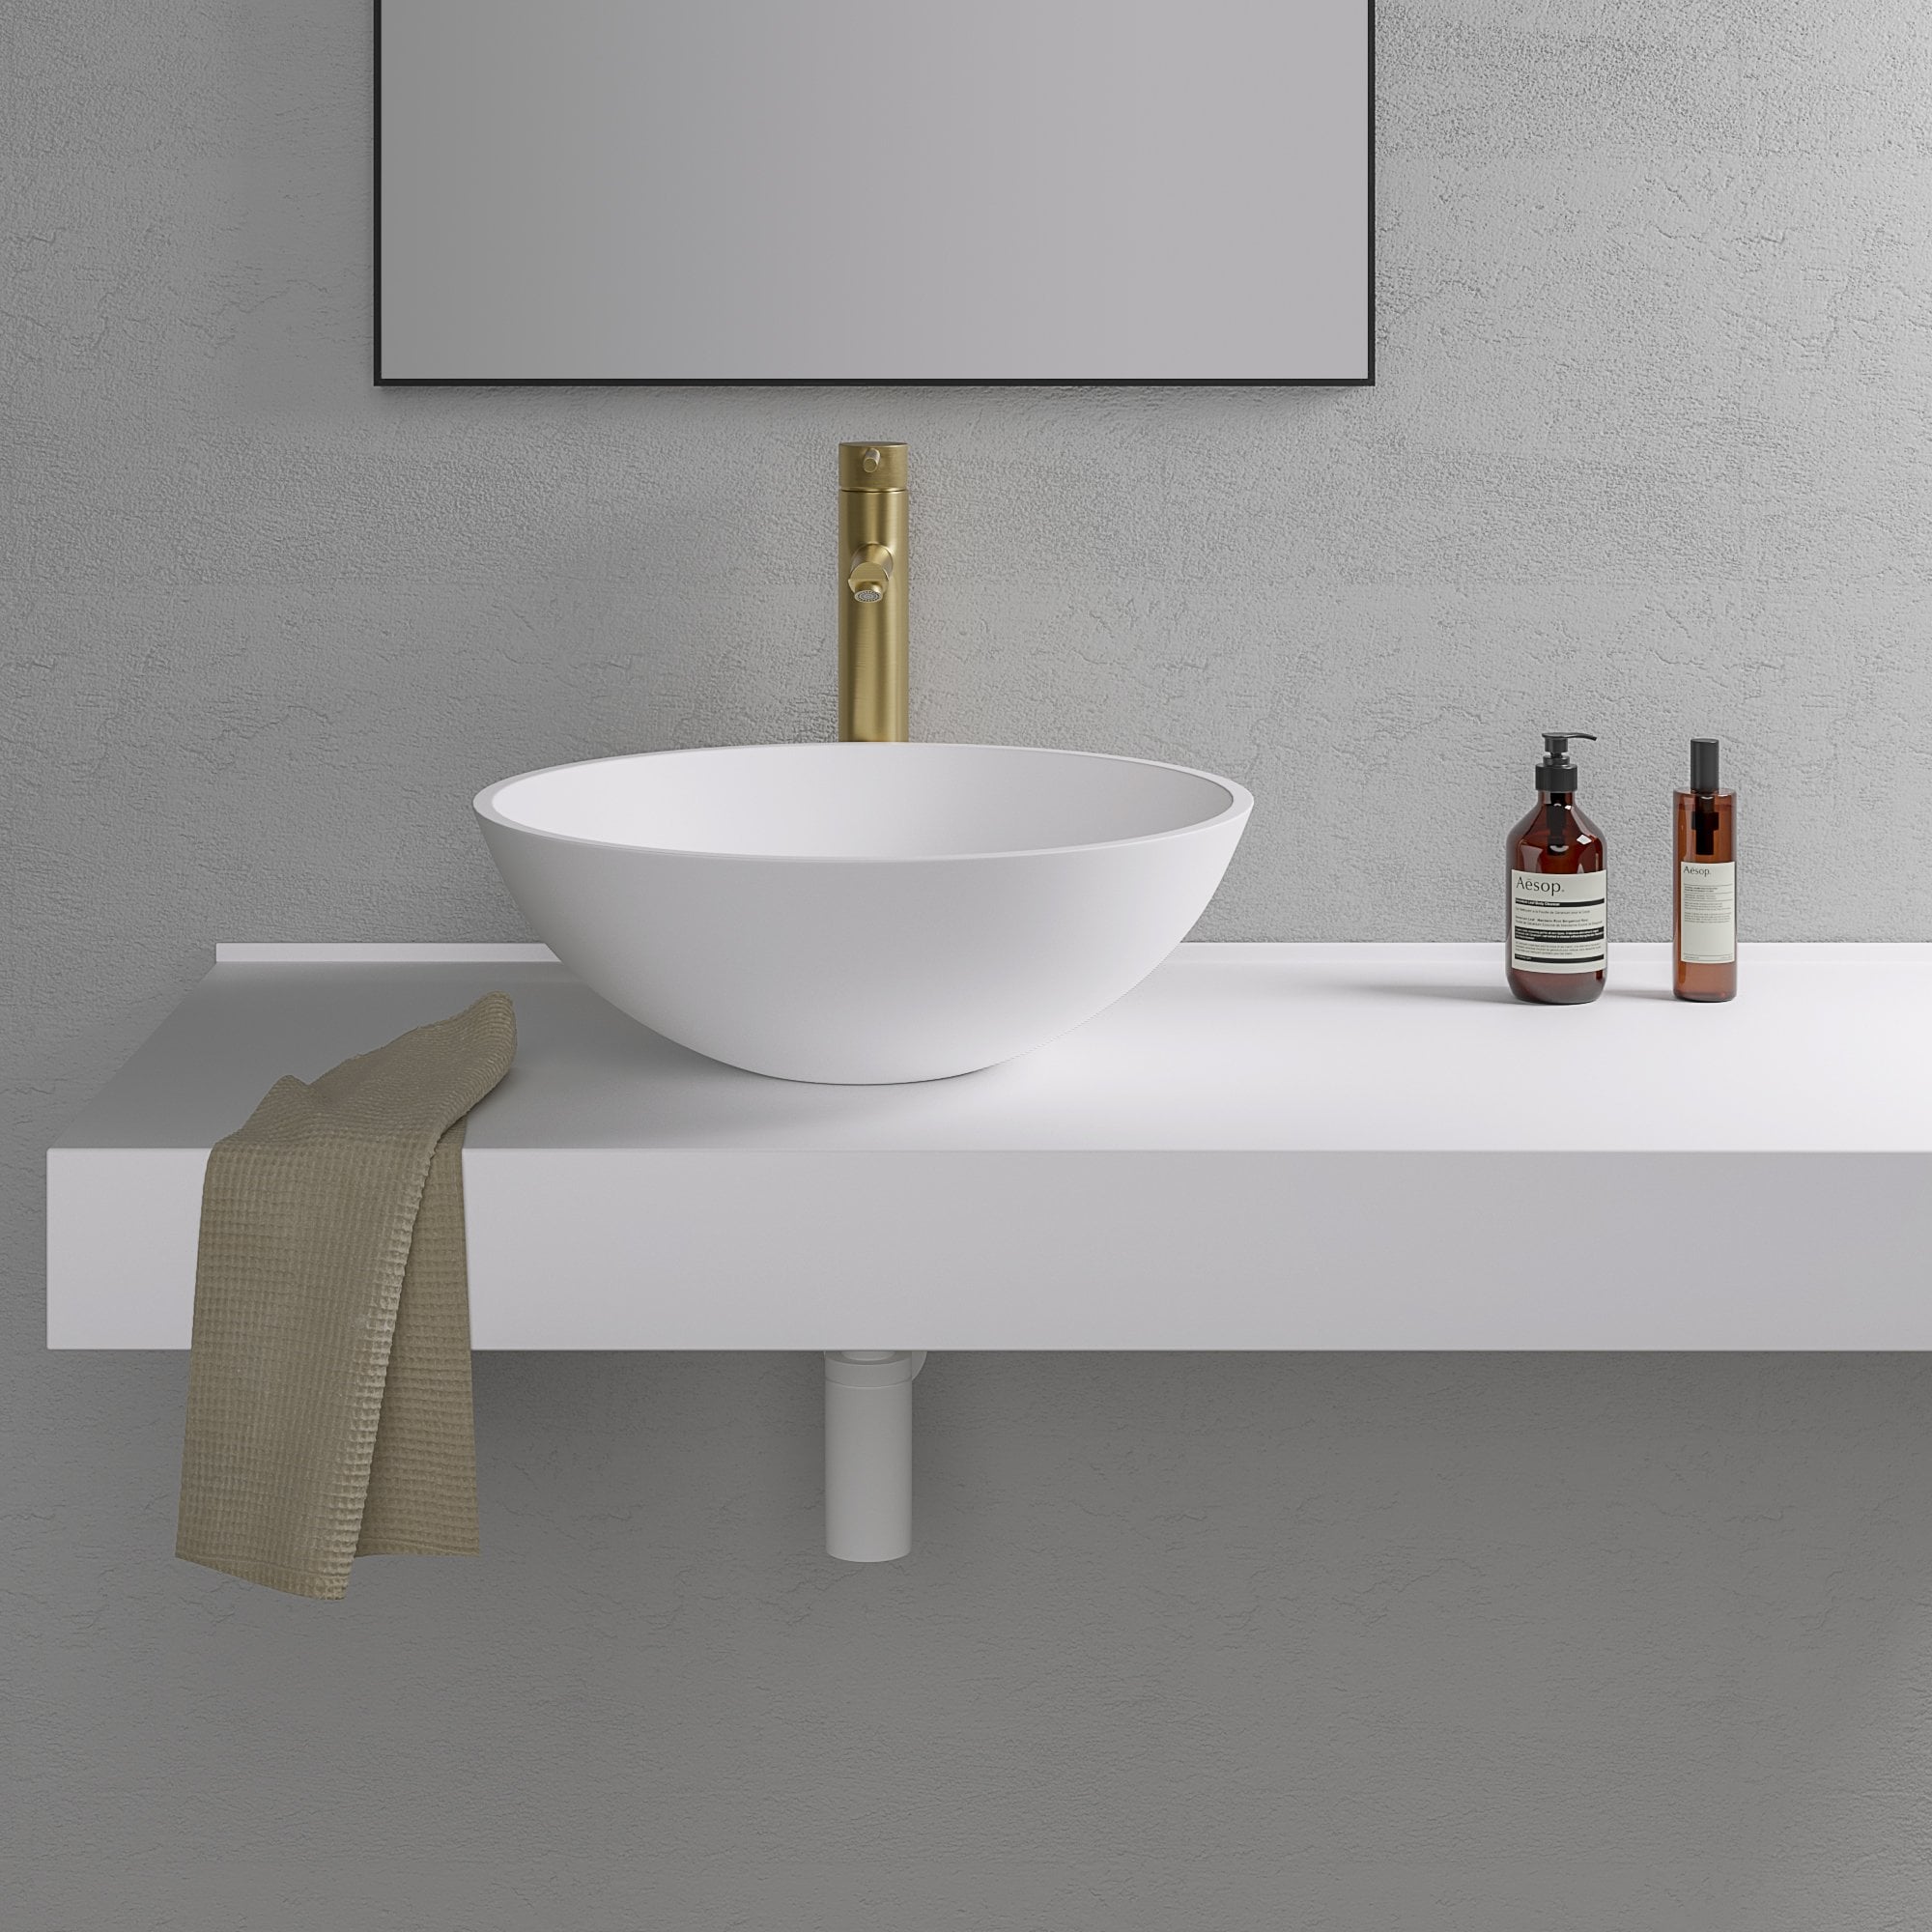 oasis-round-stone-resin-counter-top-basin-420-p132-8948_zoom